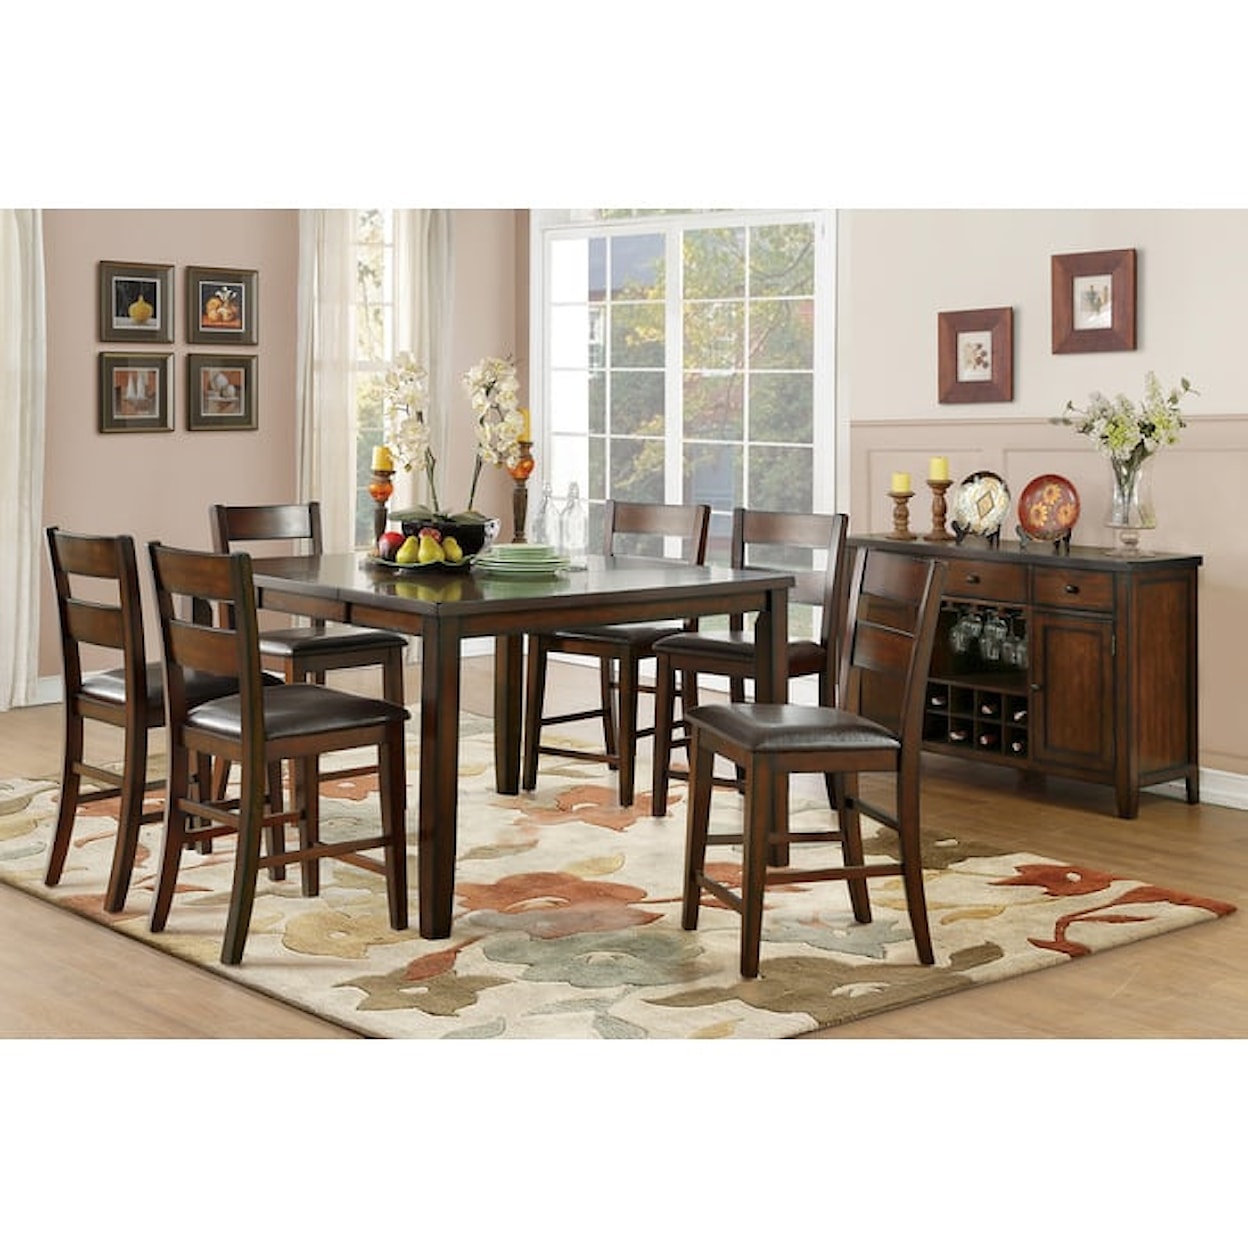 Homelegance Furniture Mantello Counter Height Table